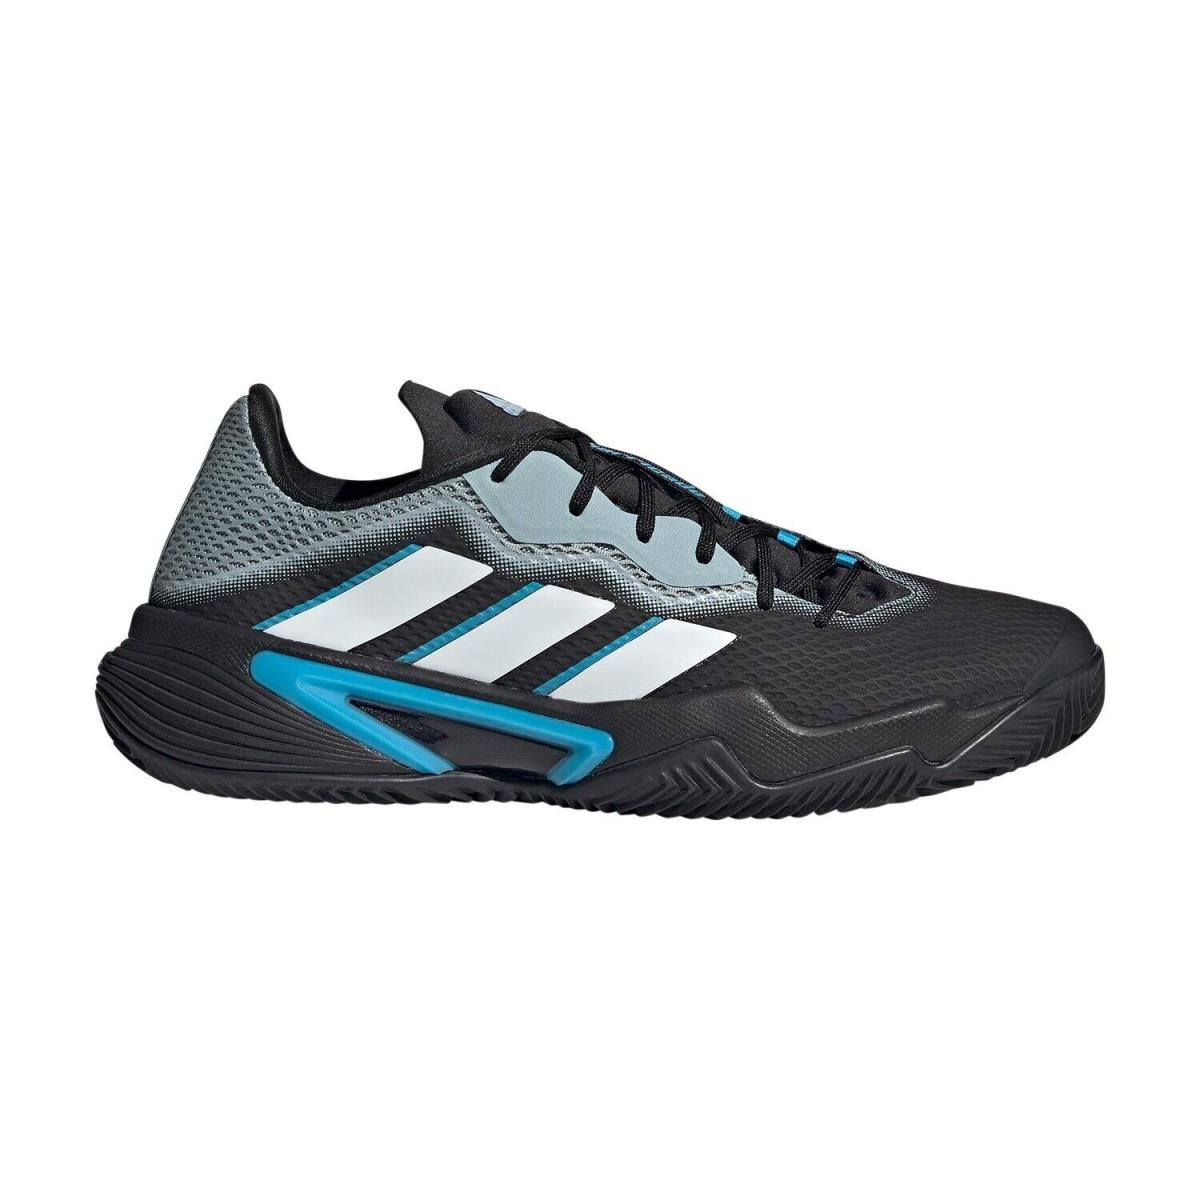 Men Adidas Barricade Clay Tennis Shoes Sneakers Size 10.5 Black Grey Blue H02047